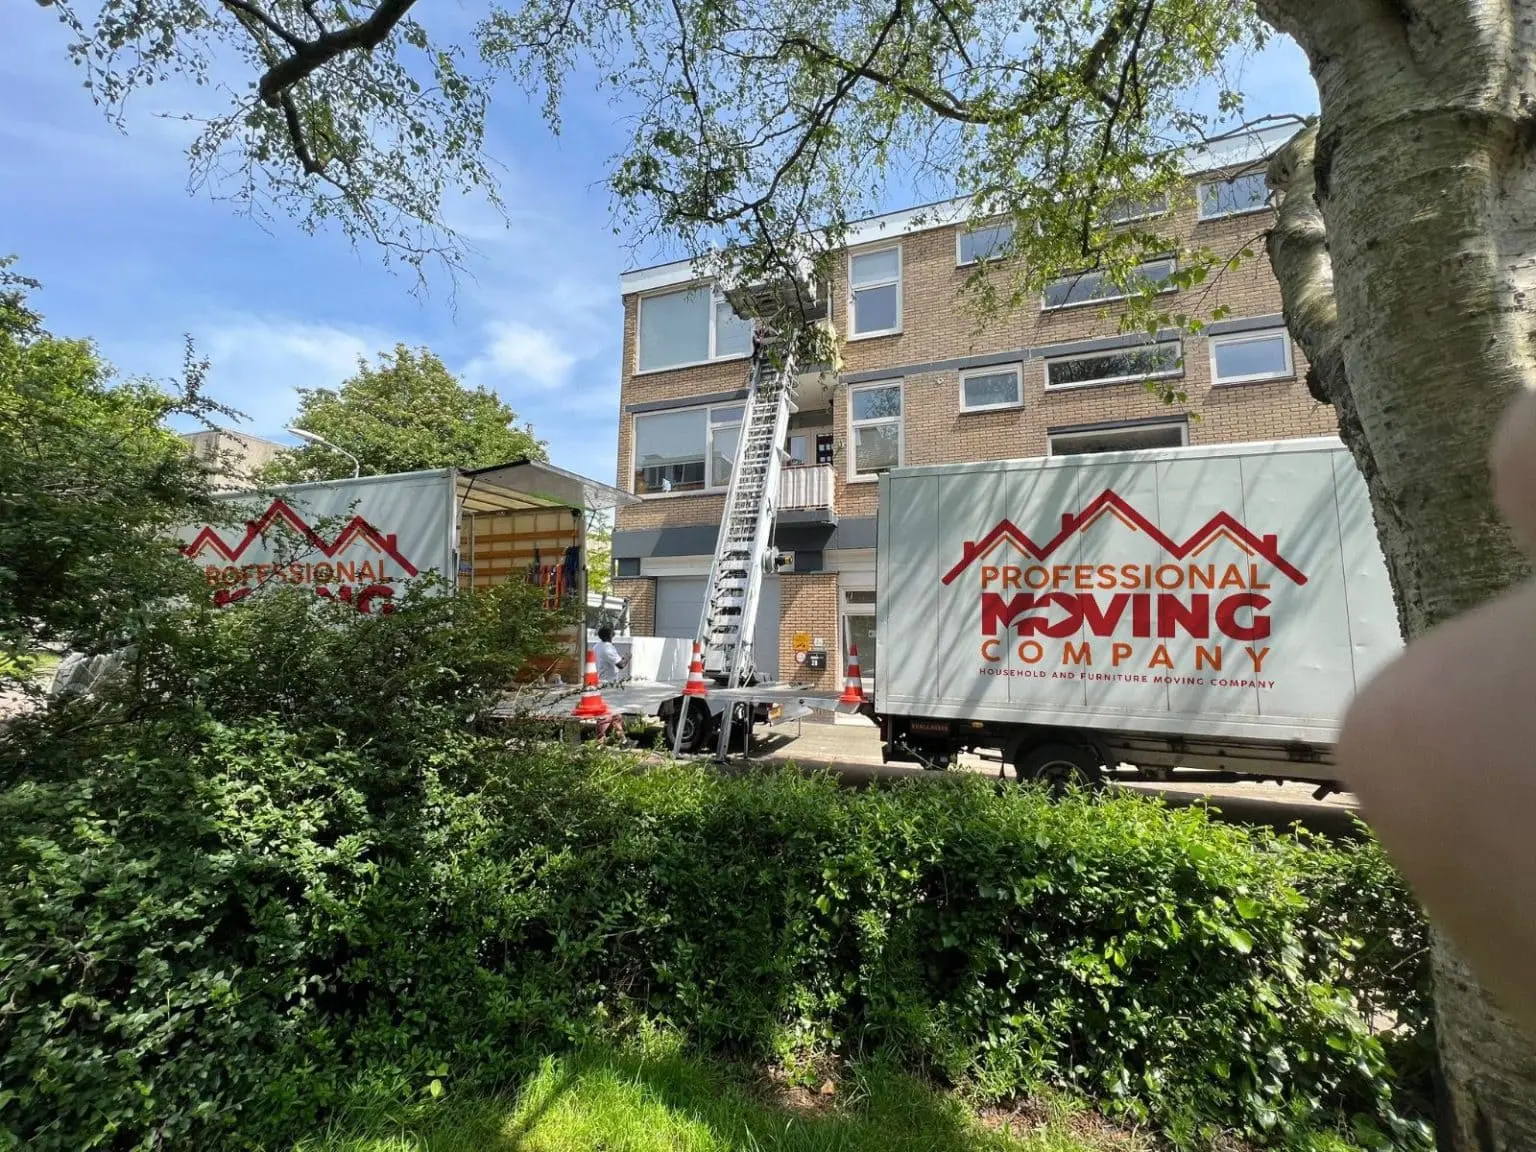 Estimating Your Move Cost | Moving Company Stede Broec